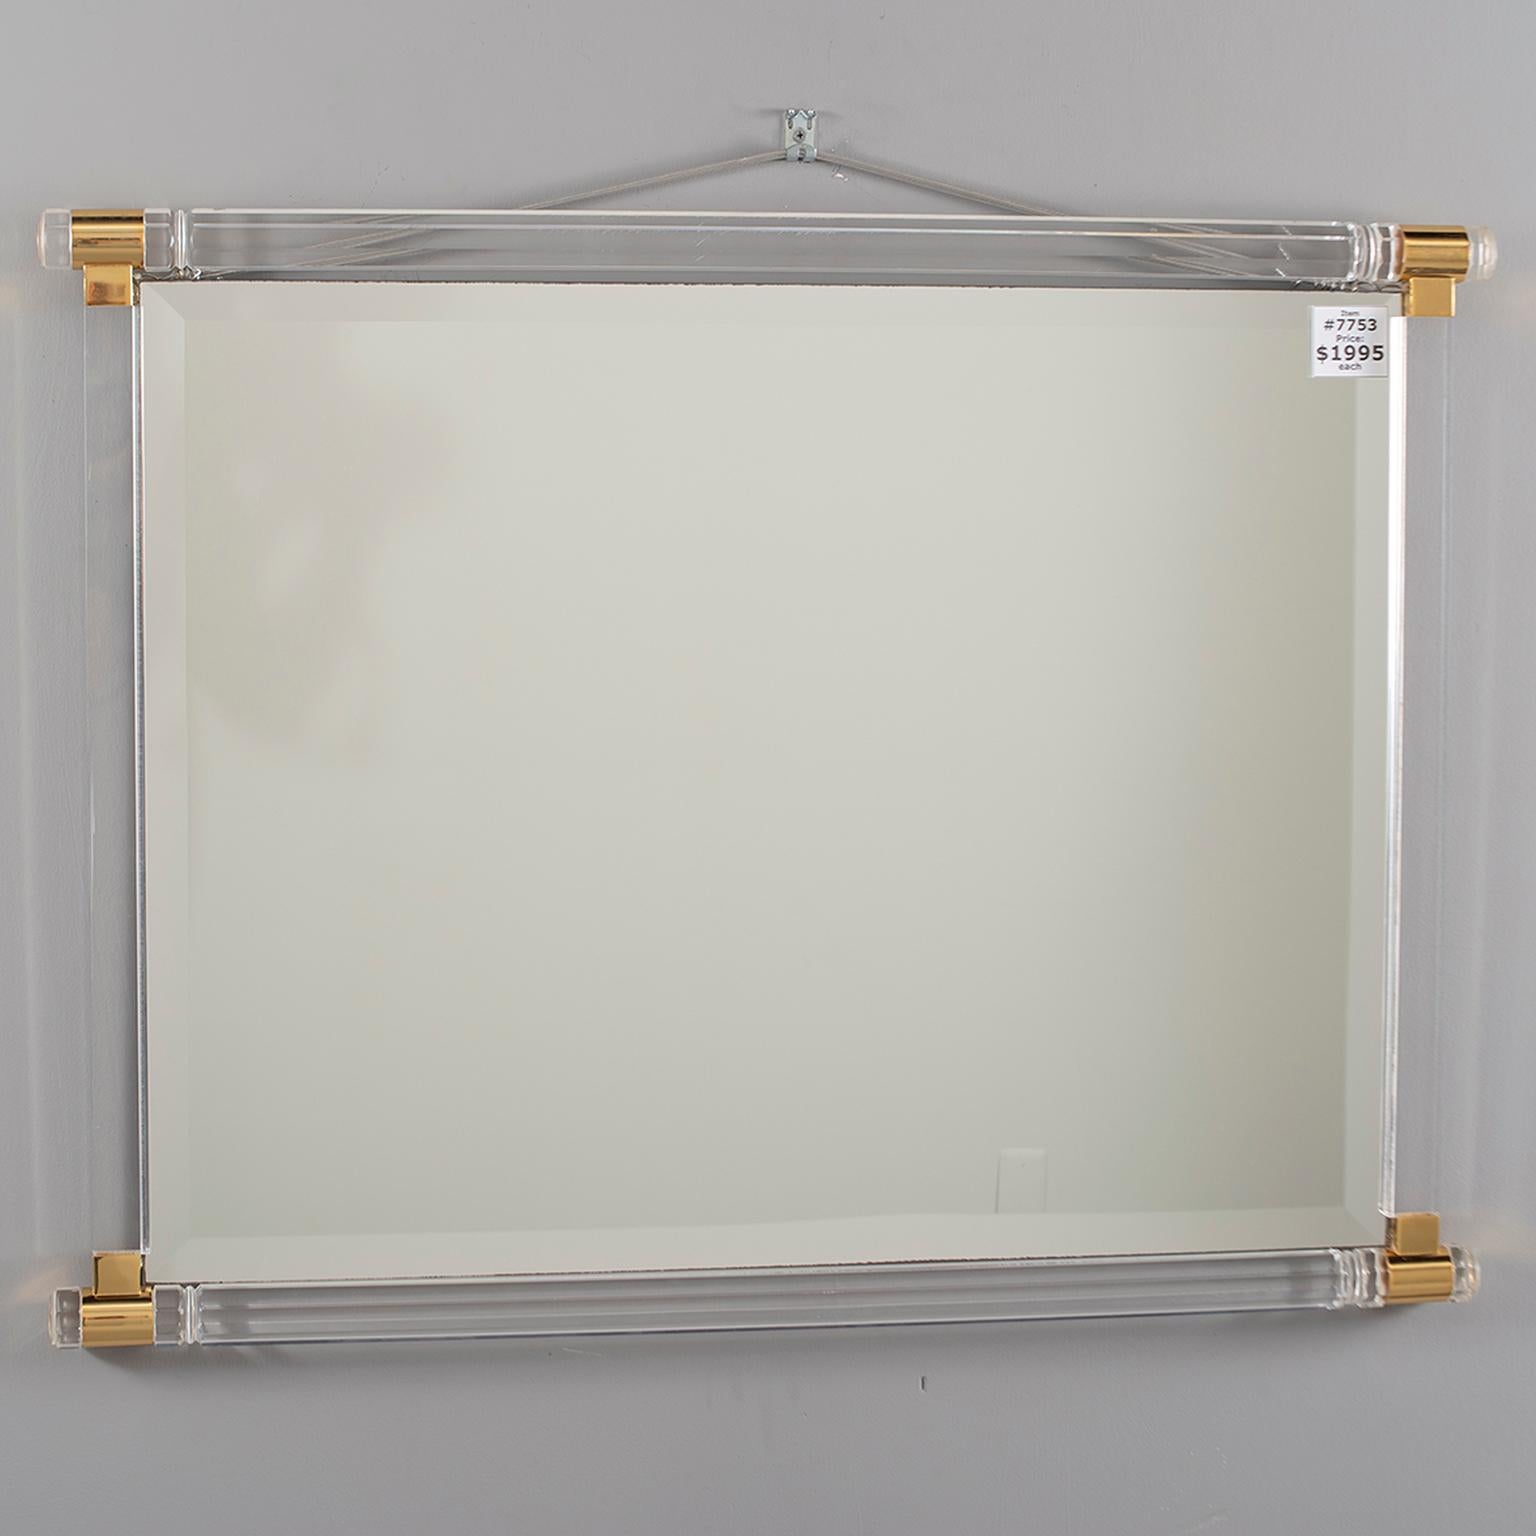 Italian wall mirror has a thick clear Lucite frame with polished brass accents. Mirror has bevelled edges. Excellent overall condition, circa 1970s.